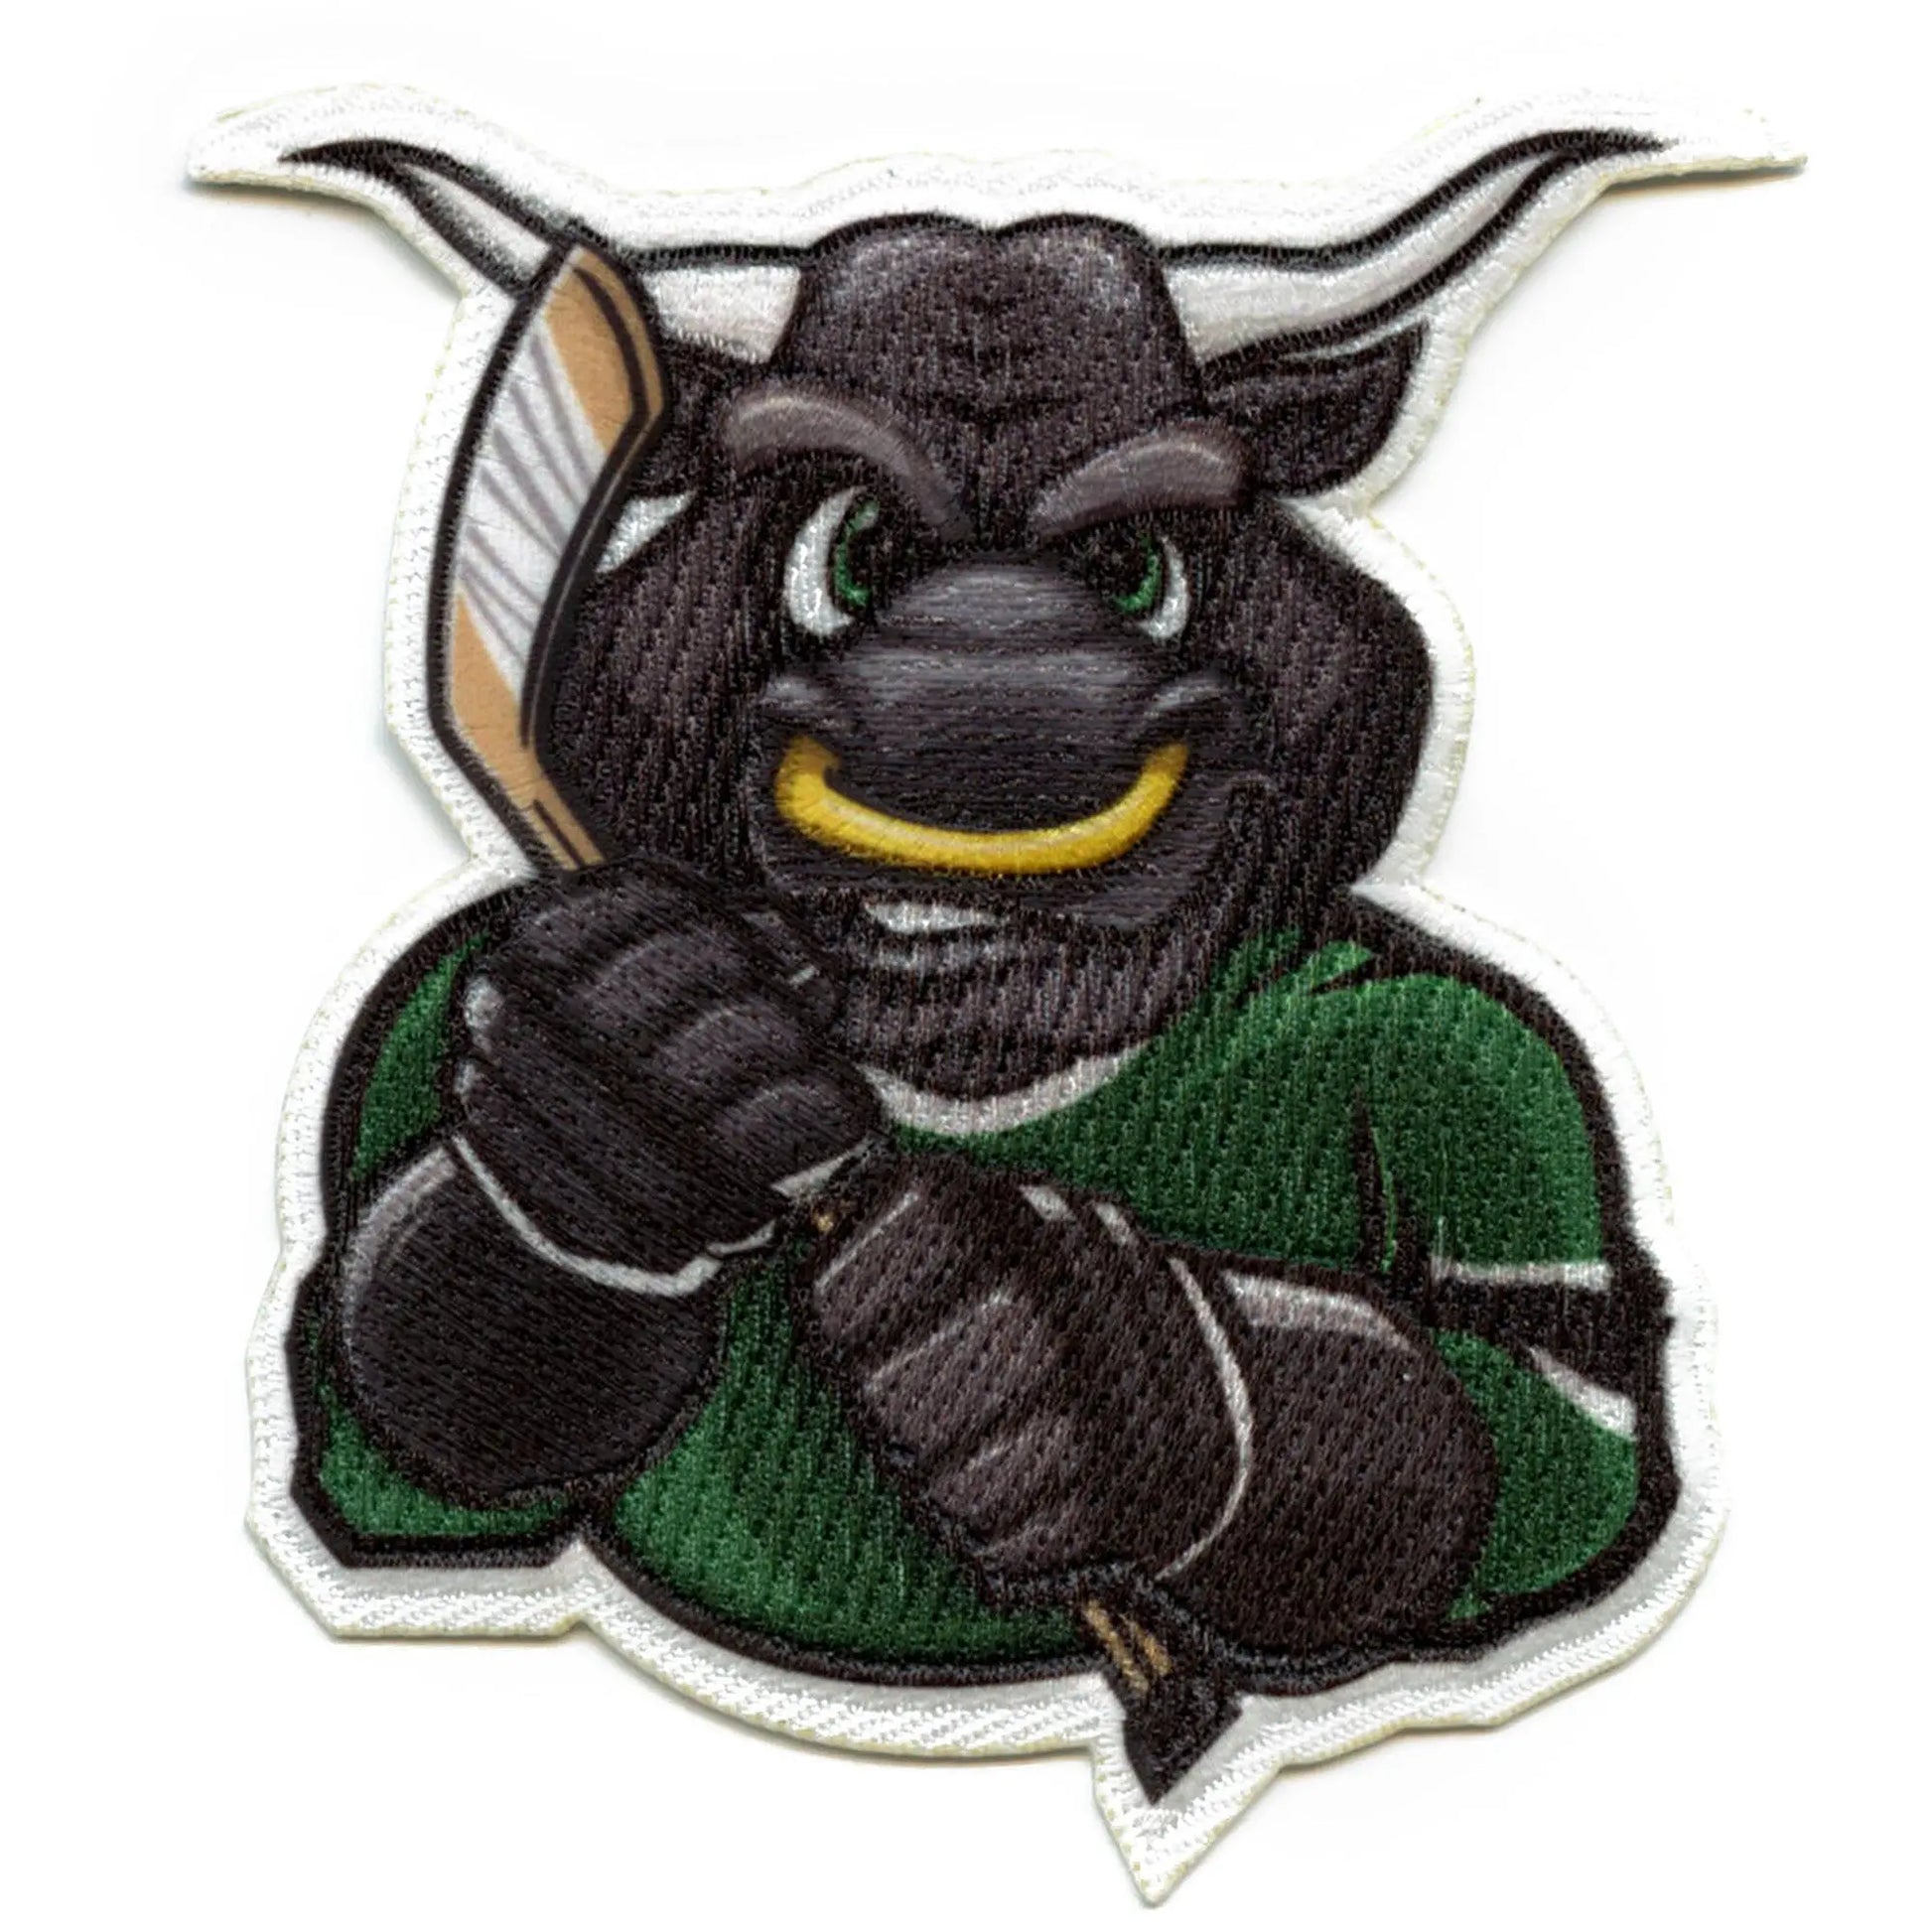 New Jersey Devil FotoPatch Mascot Hockey Parody Embroidered Iron On